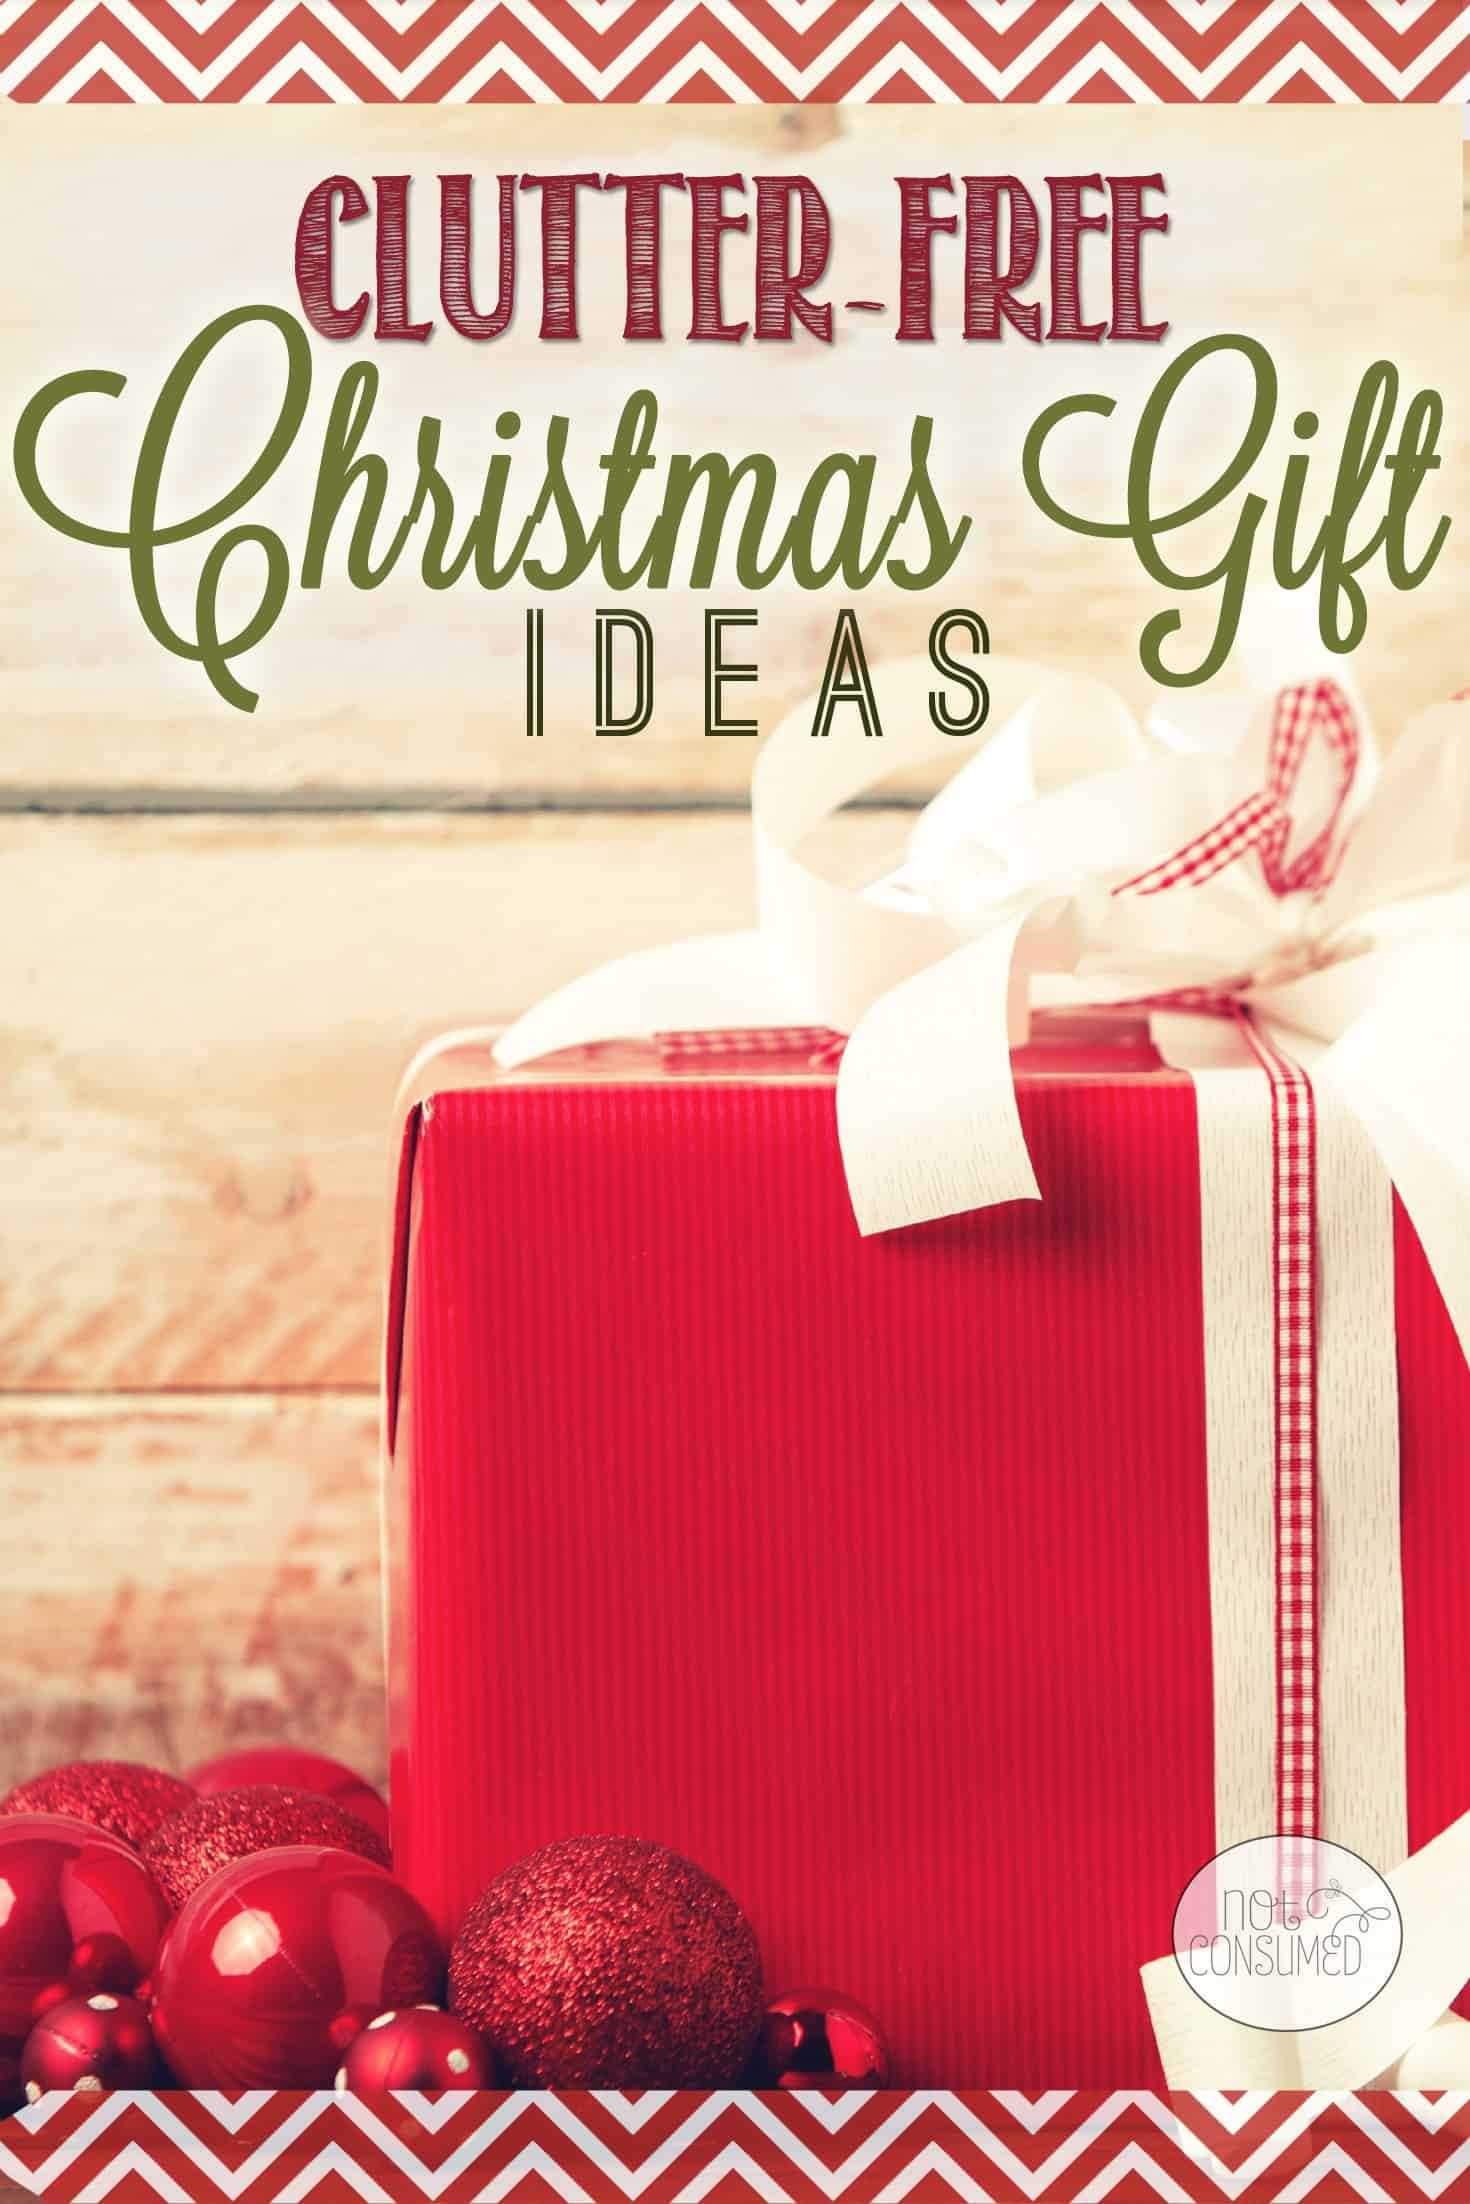 Free Christmas Gift Ideas
 Clutter Free Christmas Gift Ideas